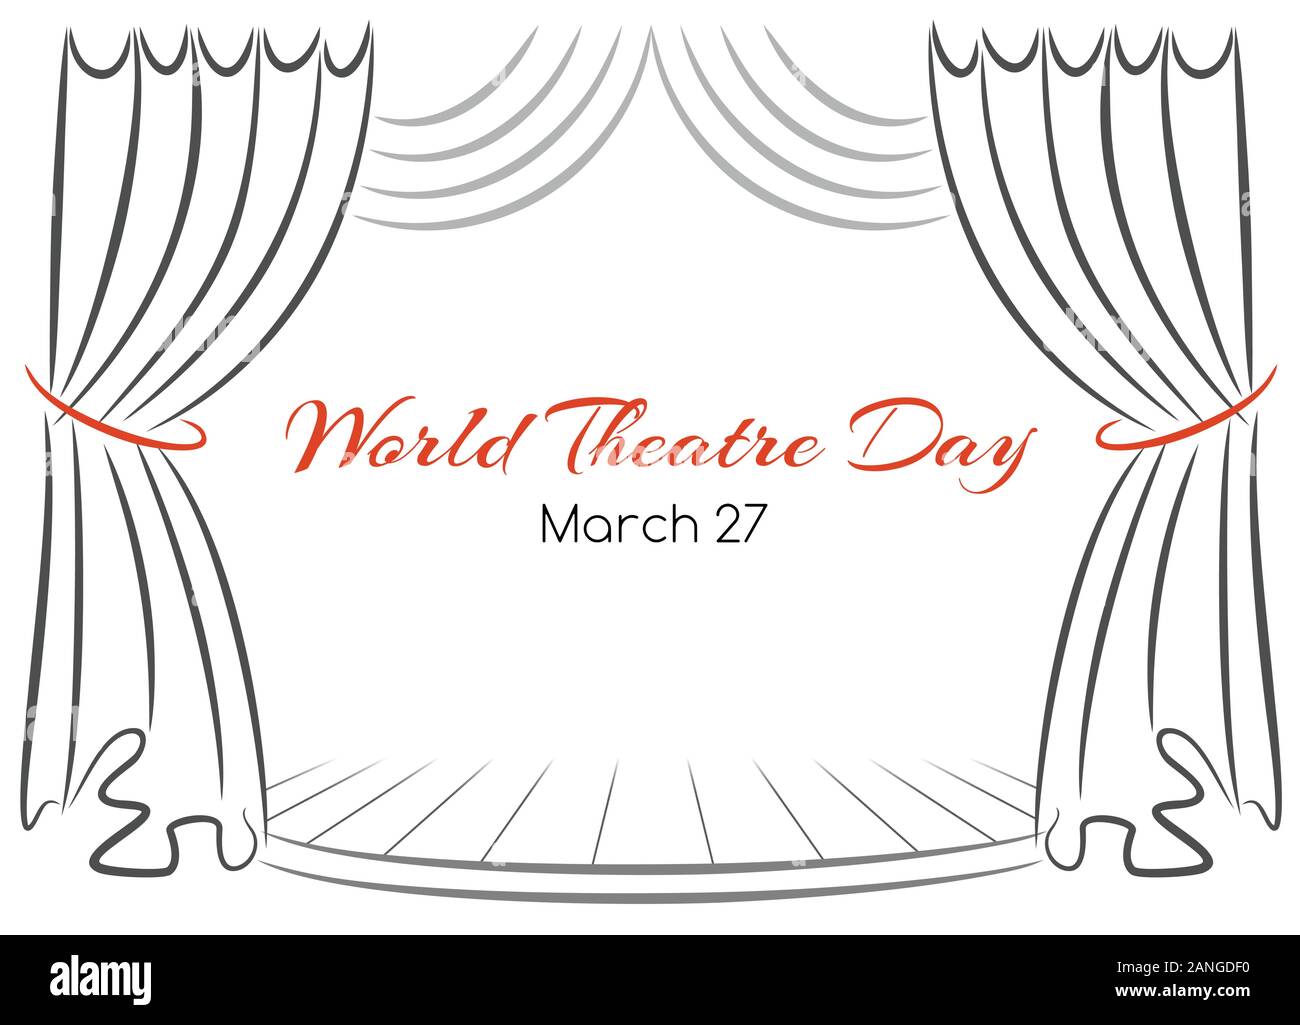 World theatre day card with curtains and scene Stock Vector